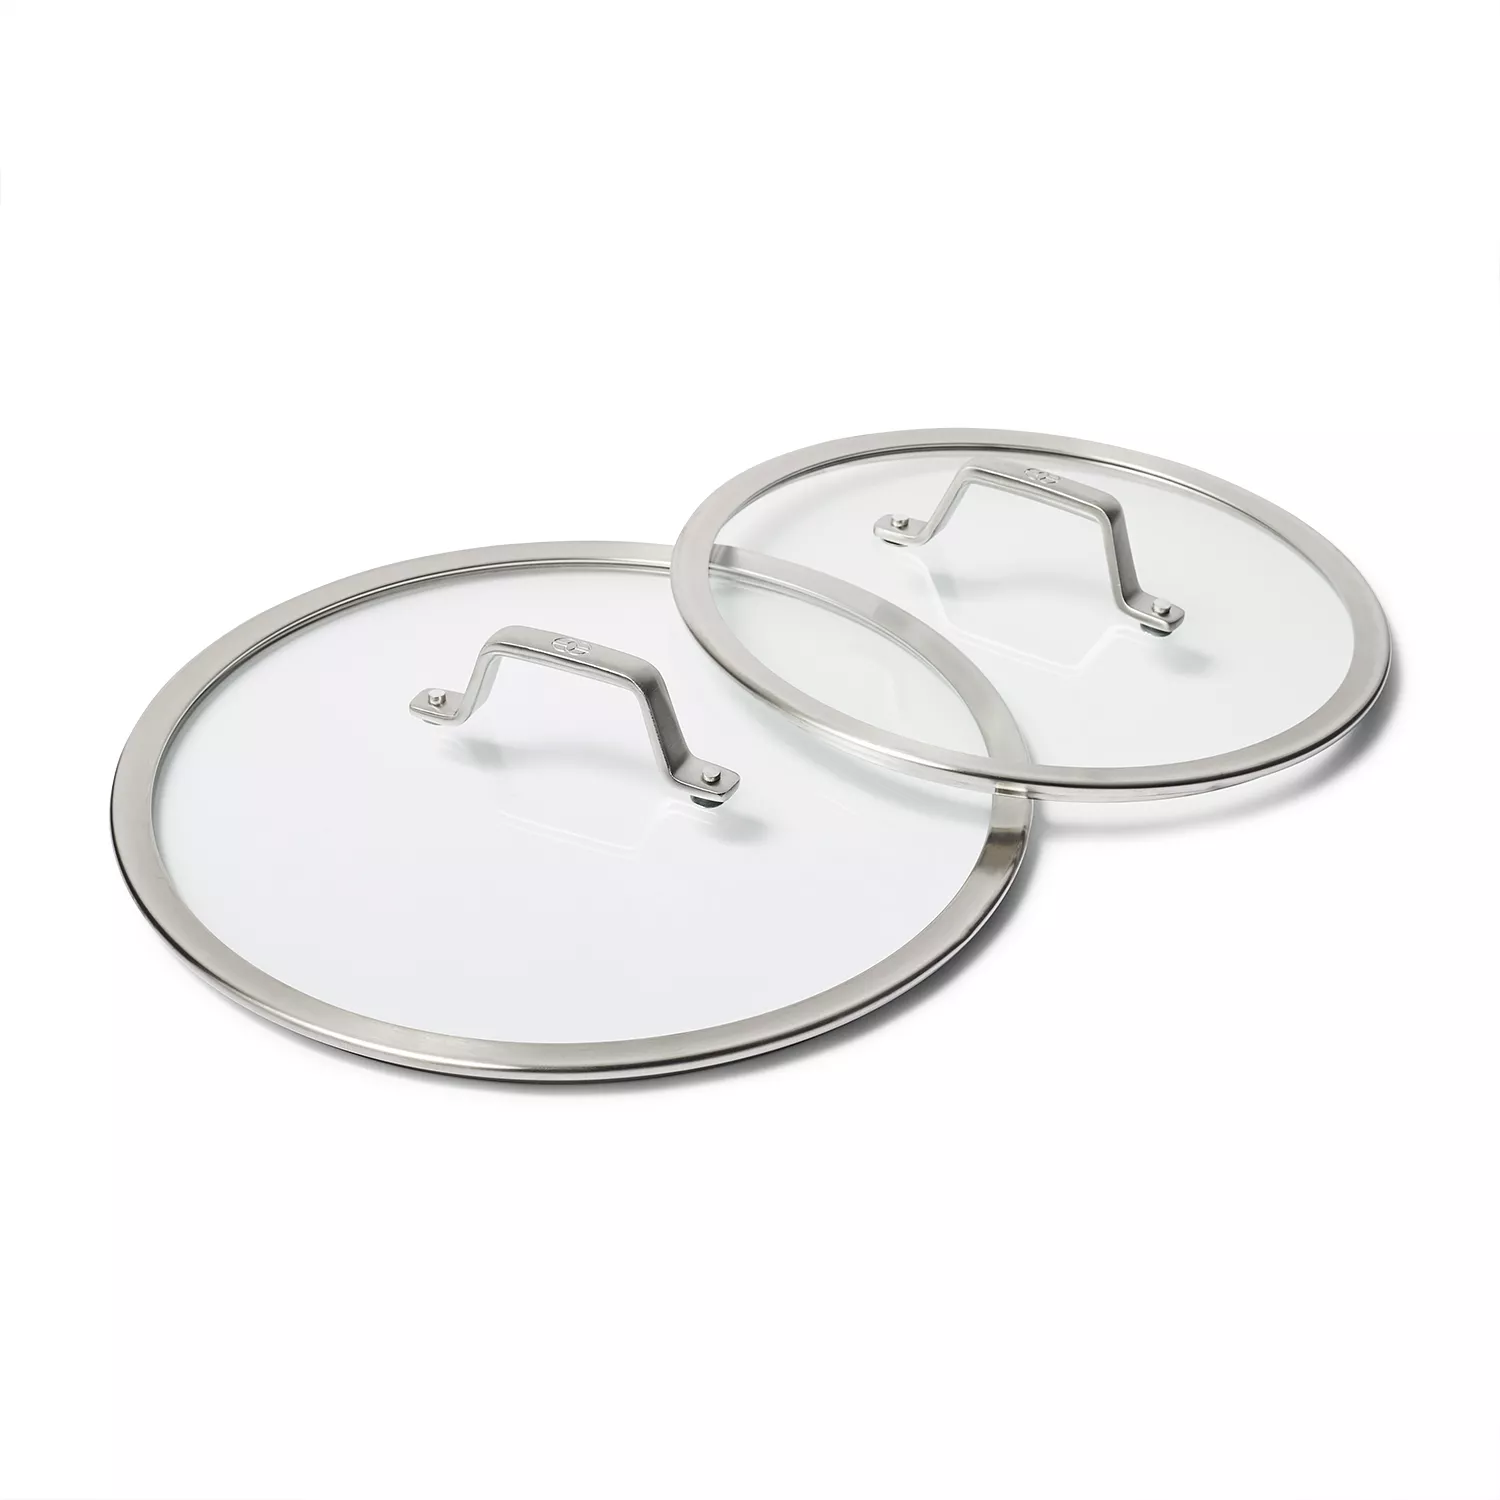 All-Clad 12 Glass Lid - Each